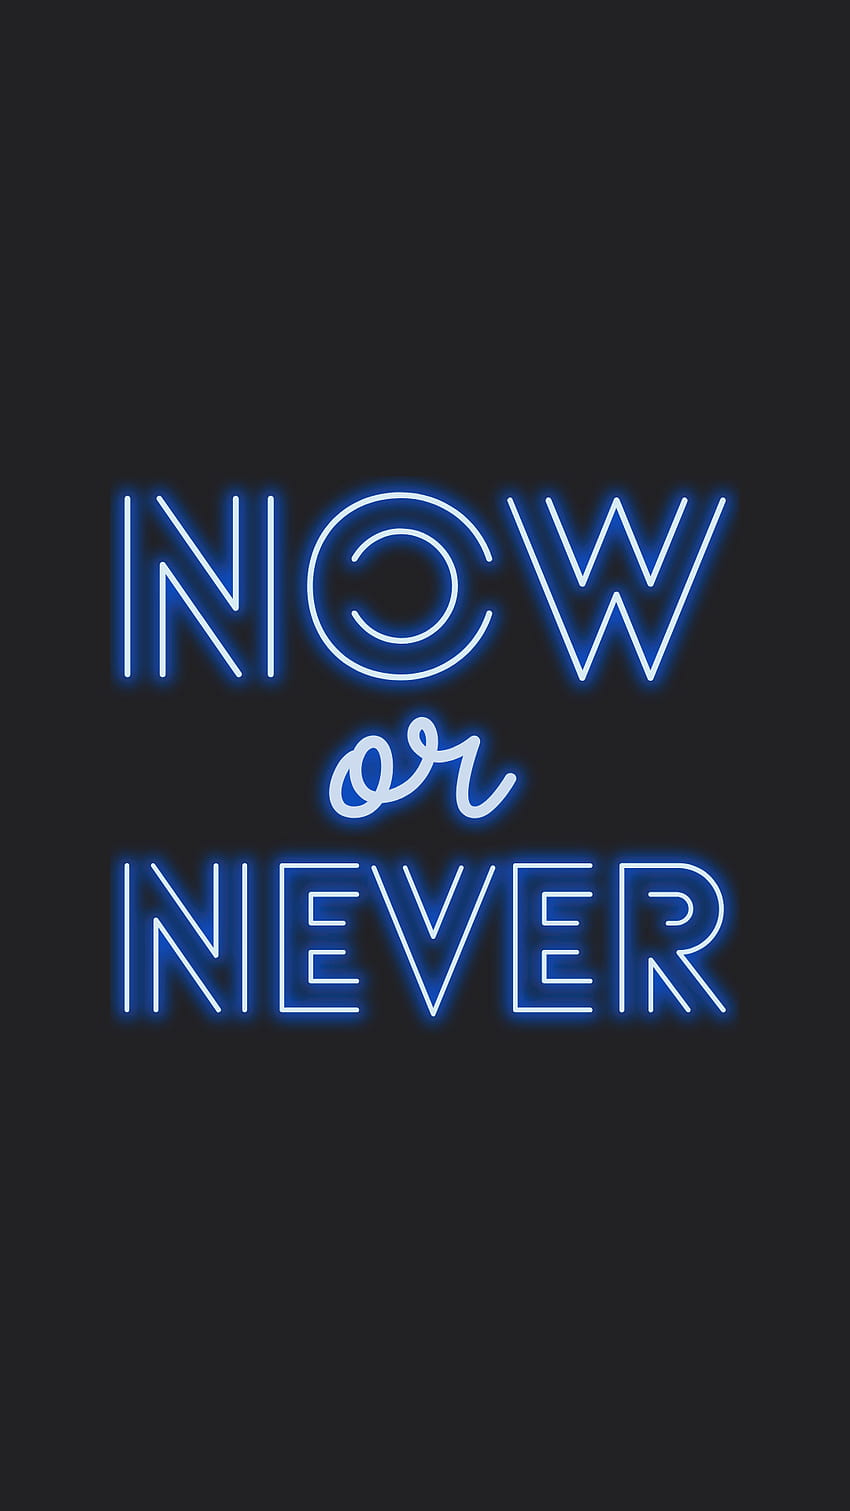 Blue Aesthetic di tahun 2020. Blue aesthetic, Blue quotes, Aesthetic, Now or Never wallpaper ponsel HD